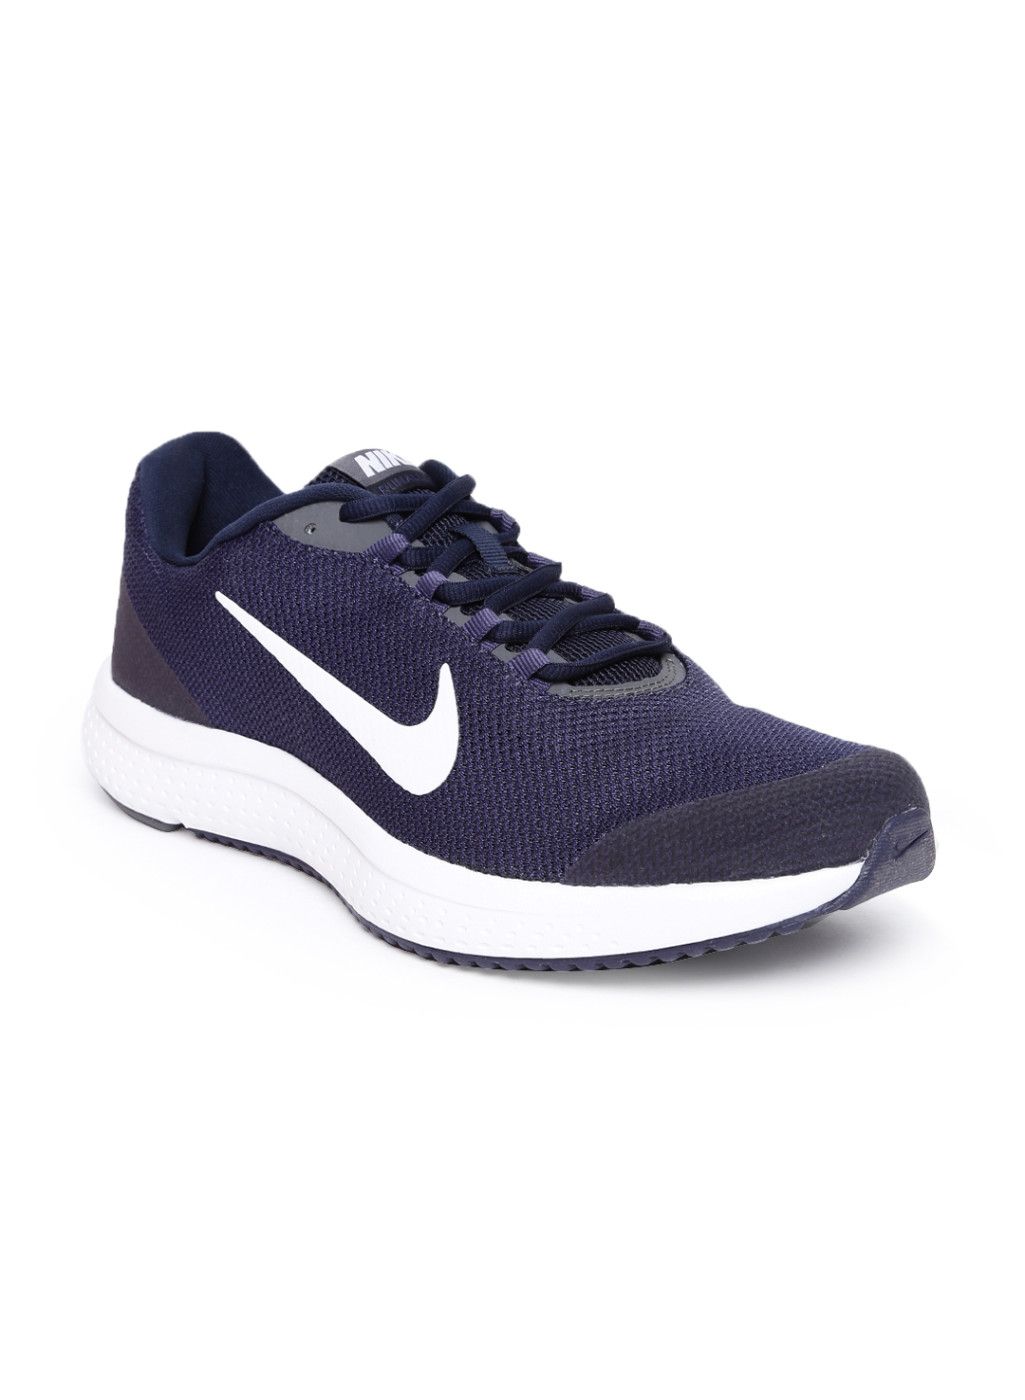 Nike Sport Shoes Online for Men in India at Best Prices | Jabong